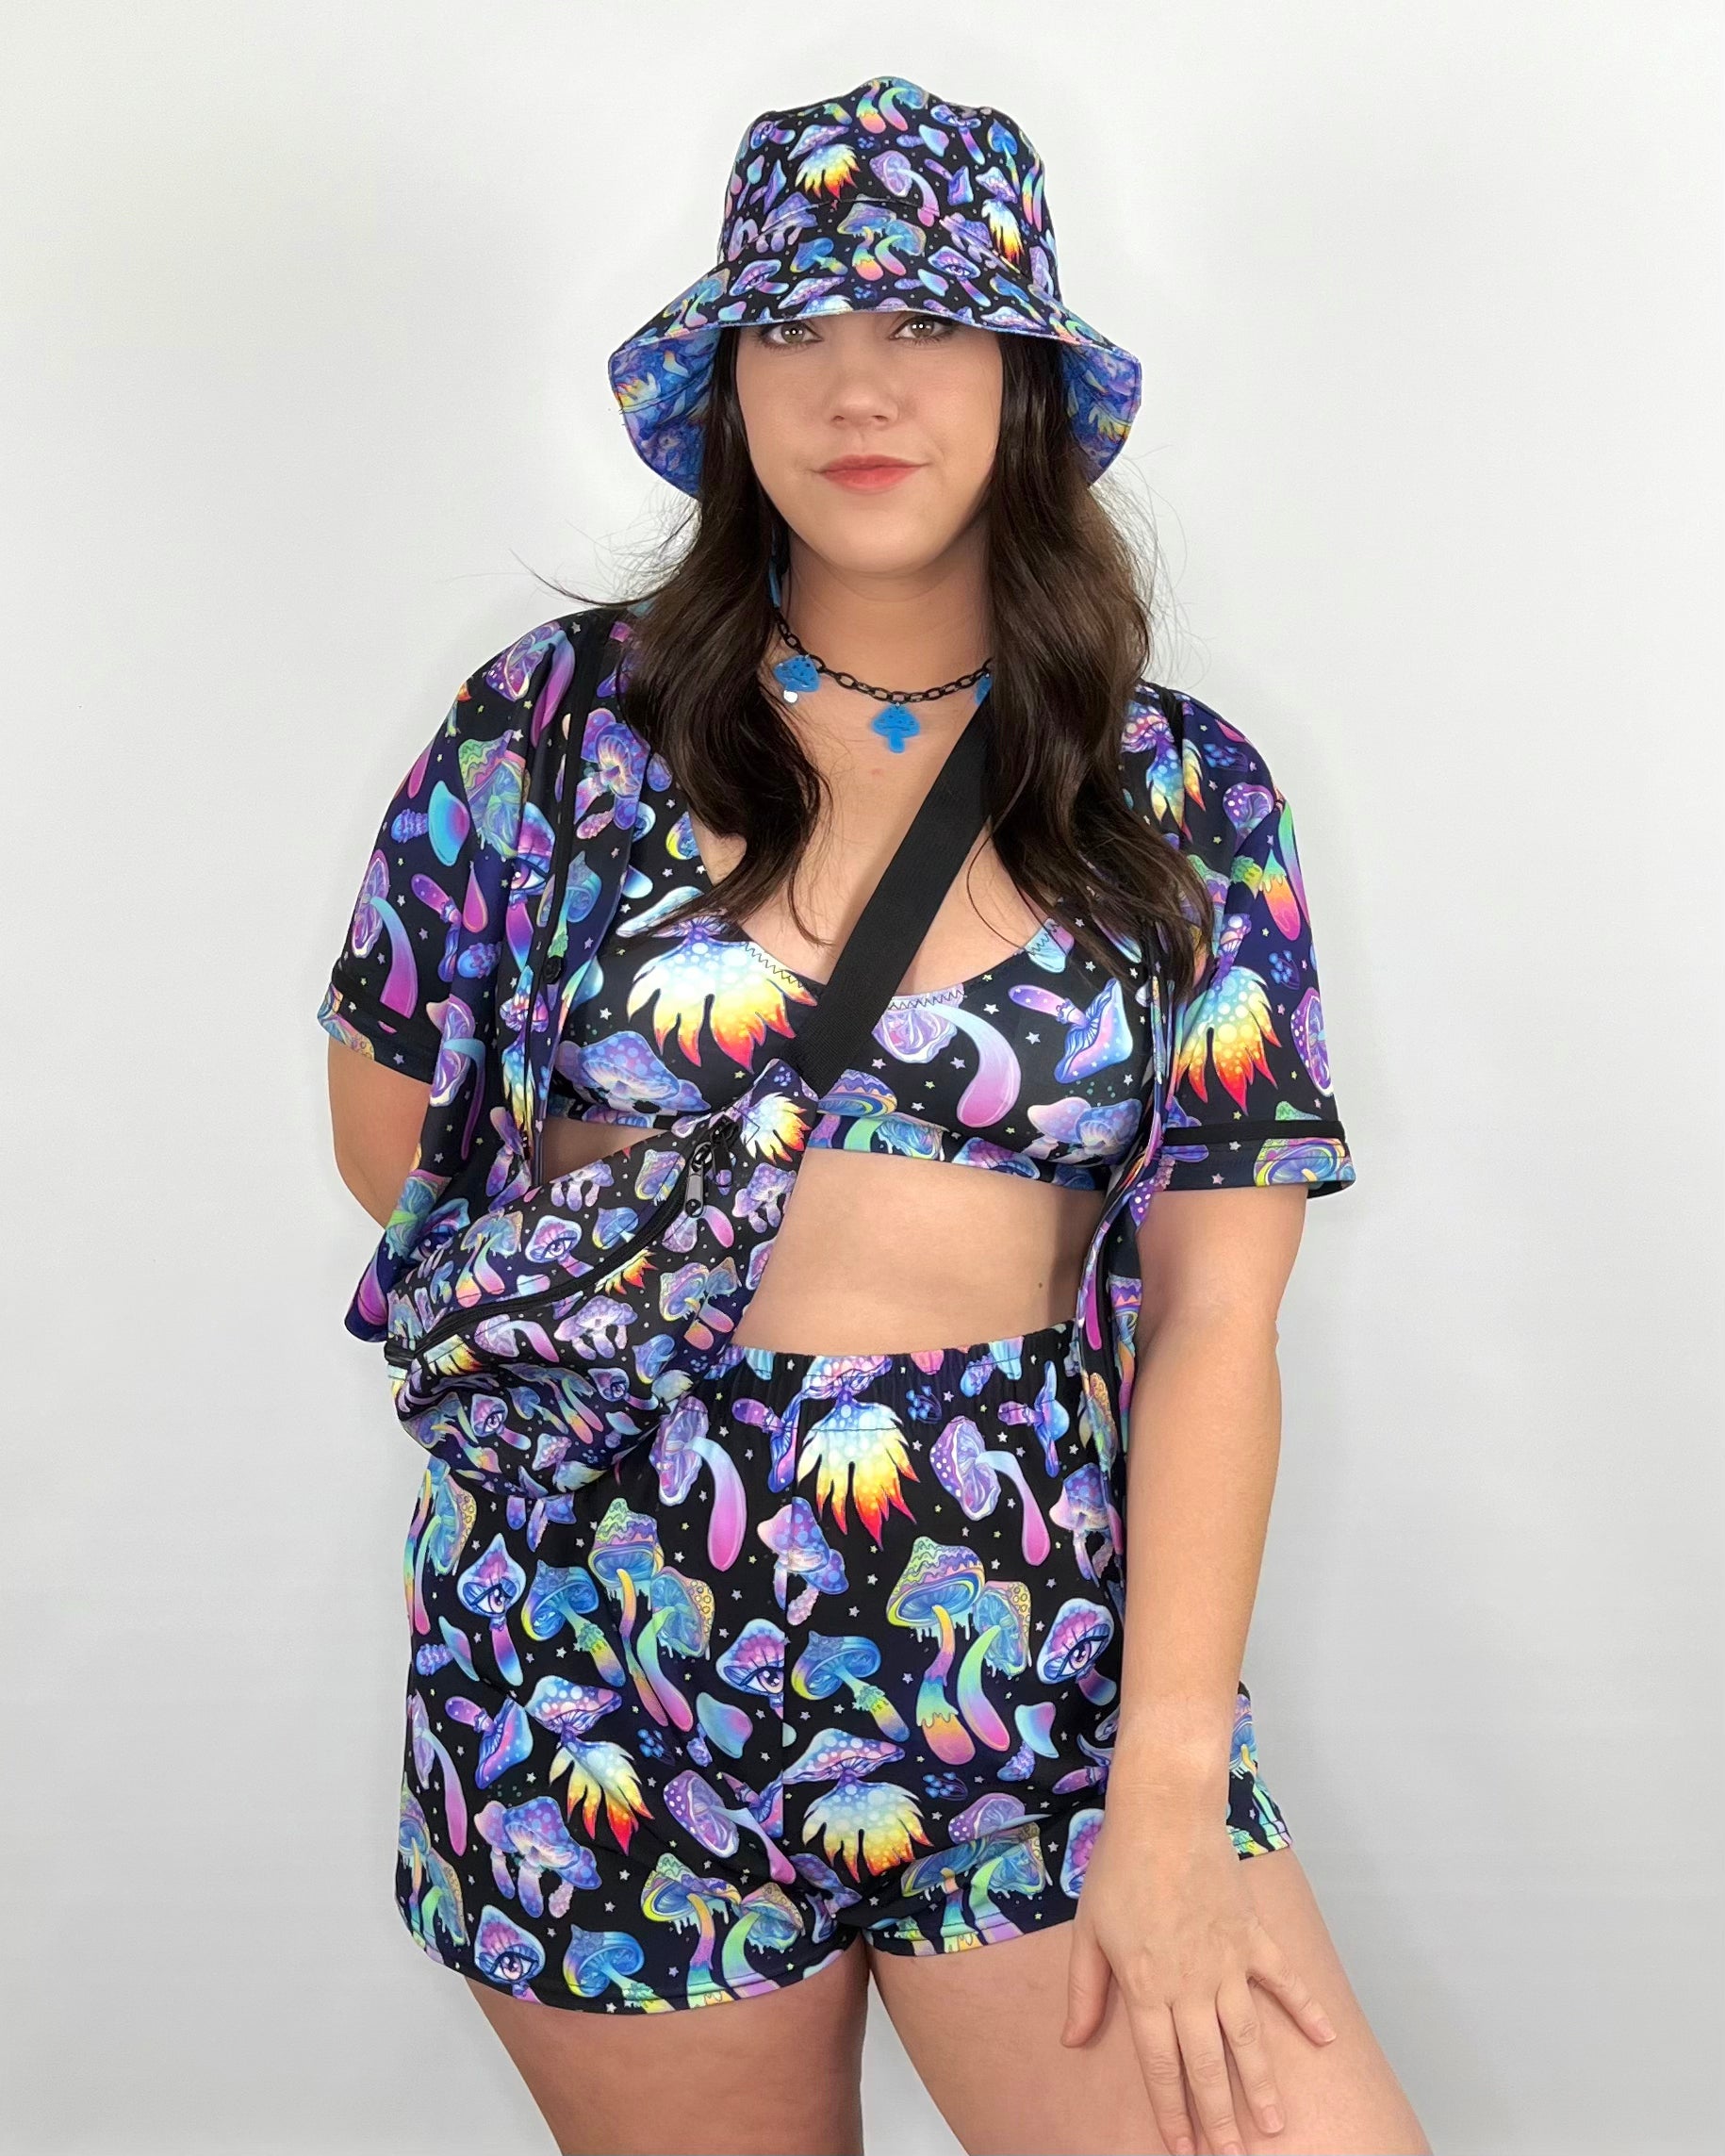 Shroomin Black Cropped Baseball Jersey, Cropped Baseball Jersey, - One Stop Rave